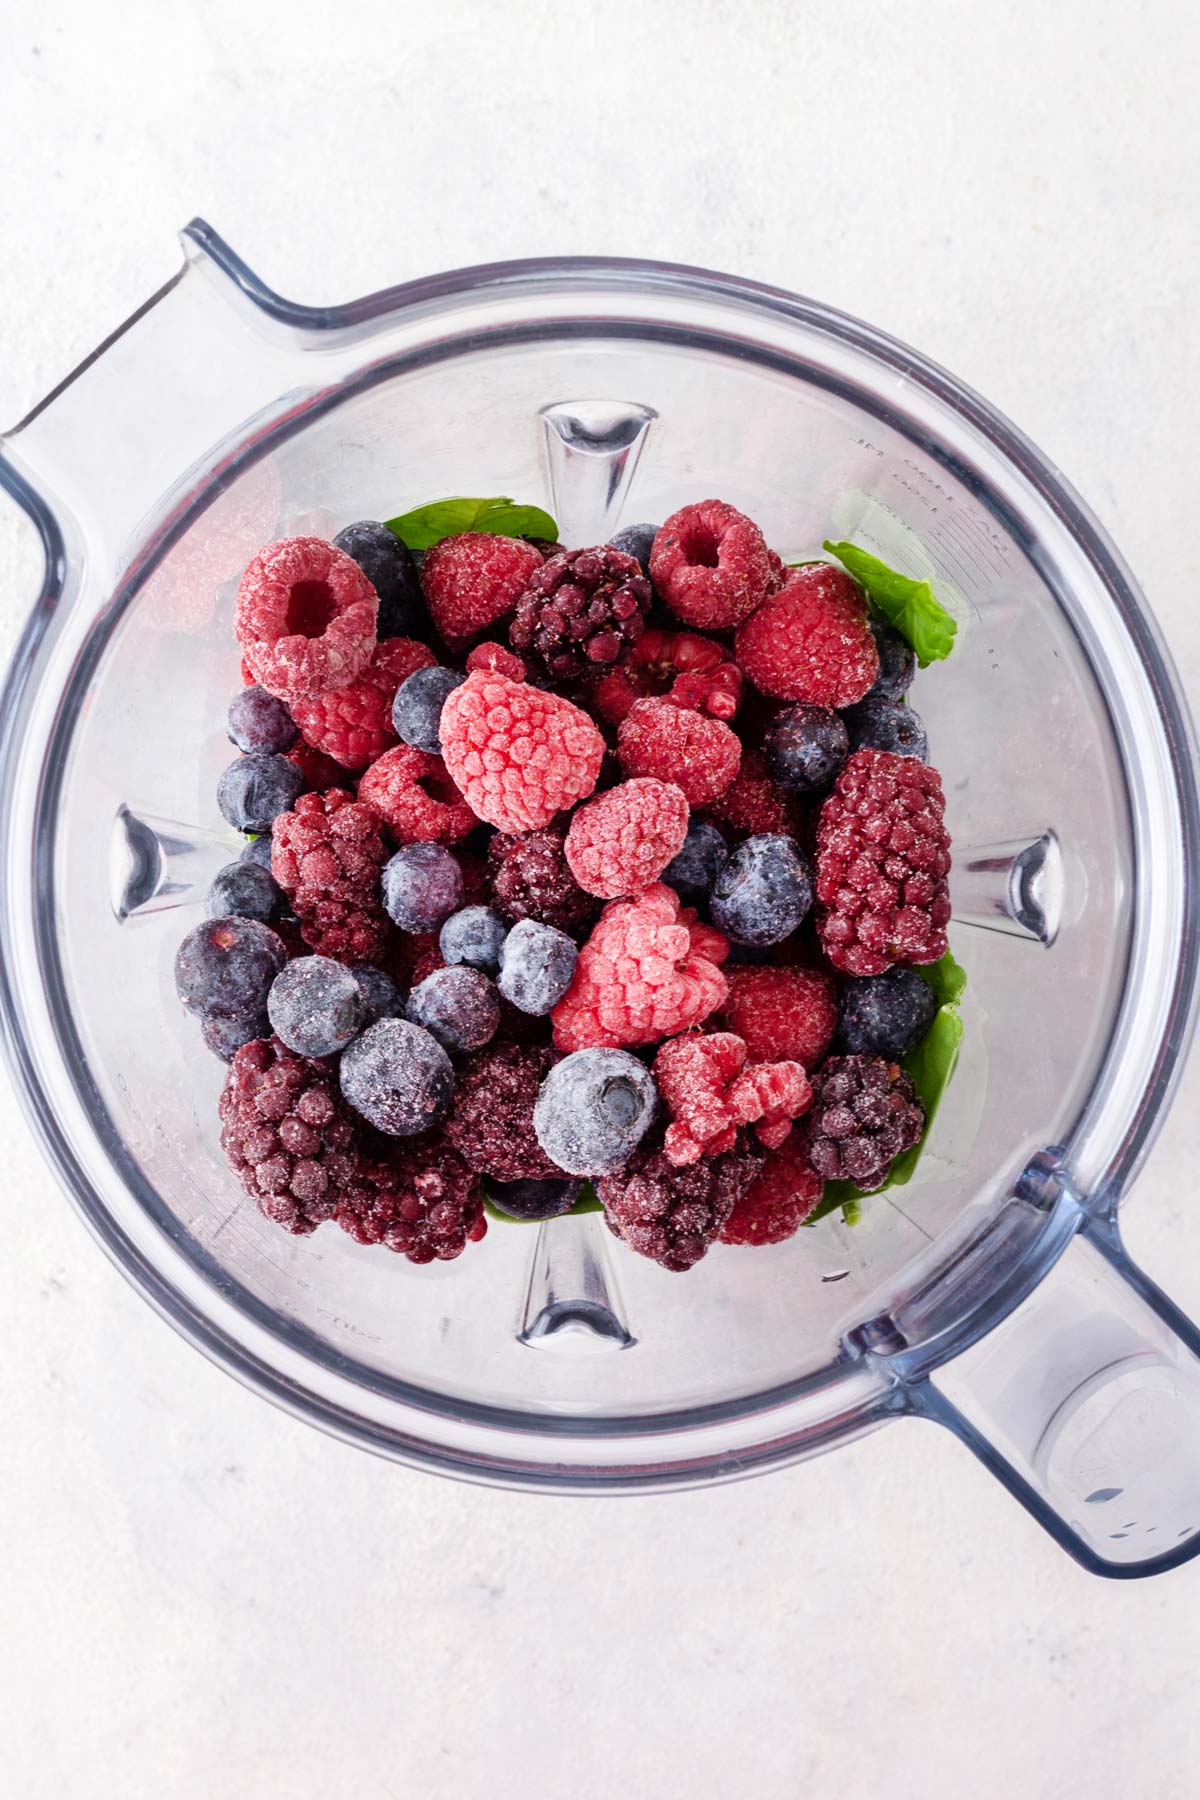 Ingredients for berry smoothie in a blender.